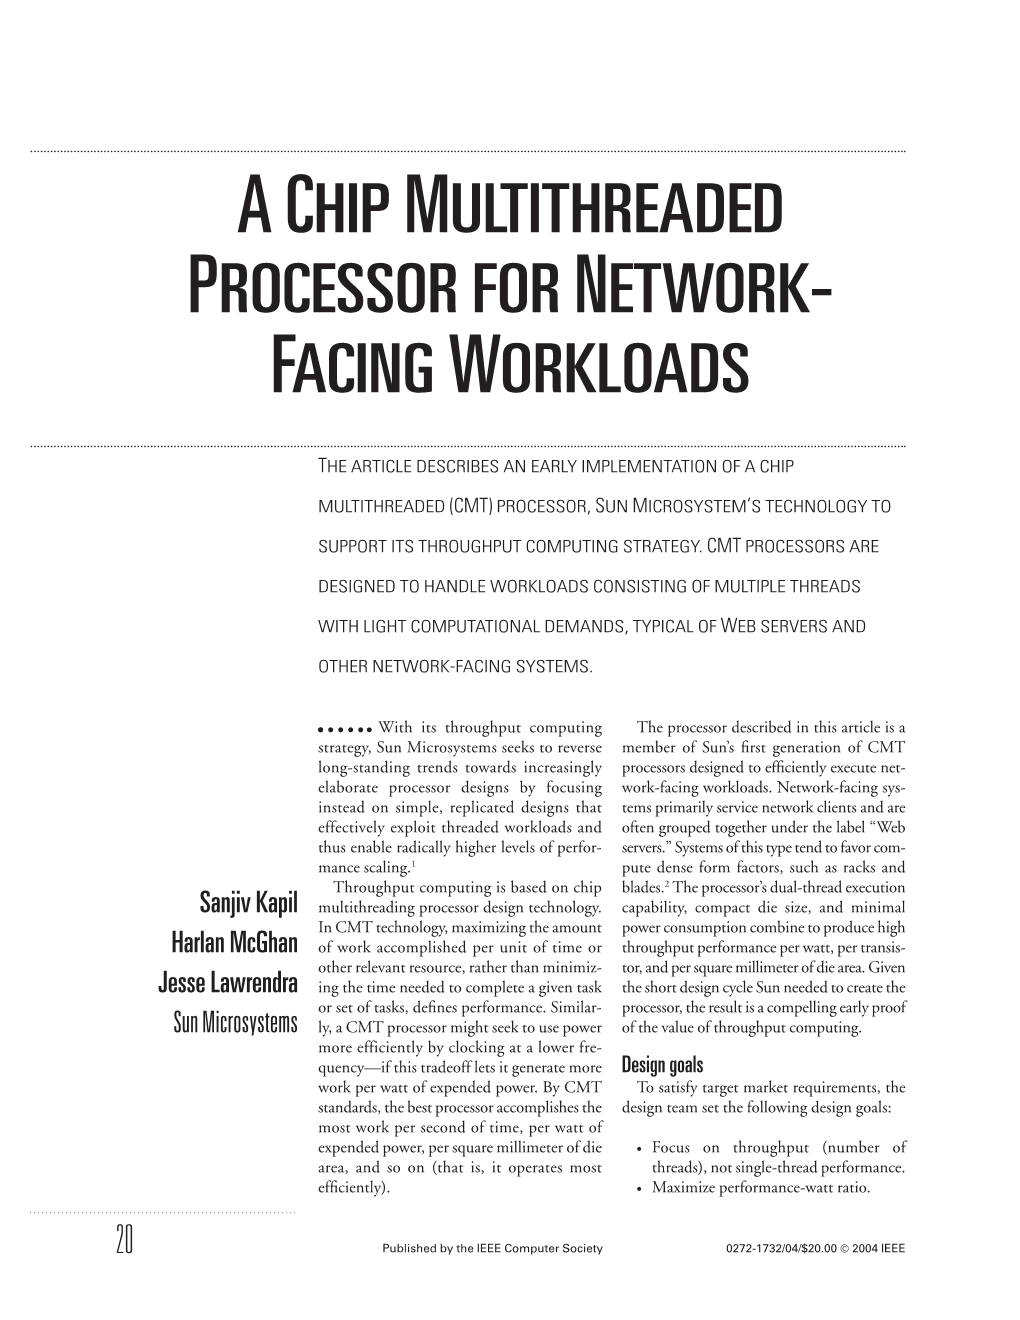 A Chip Multithreaded Processor for Network-Facing Workloads